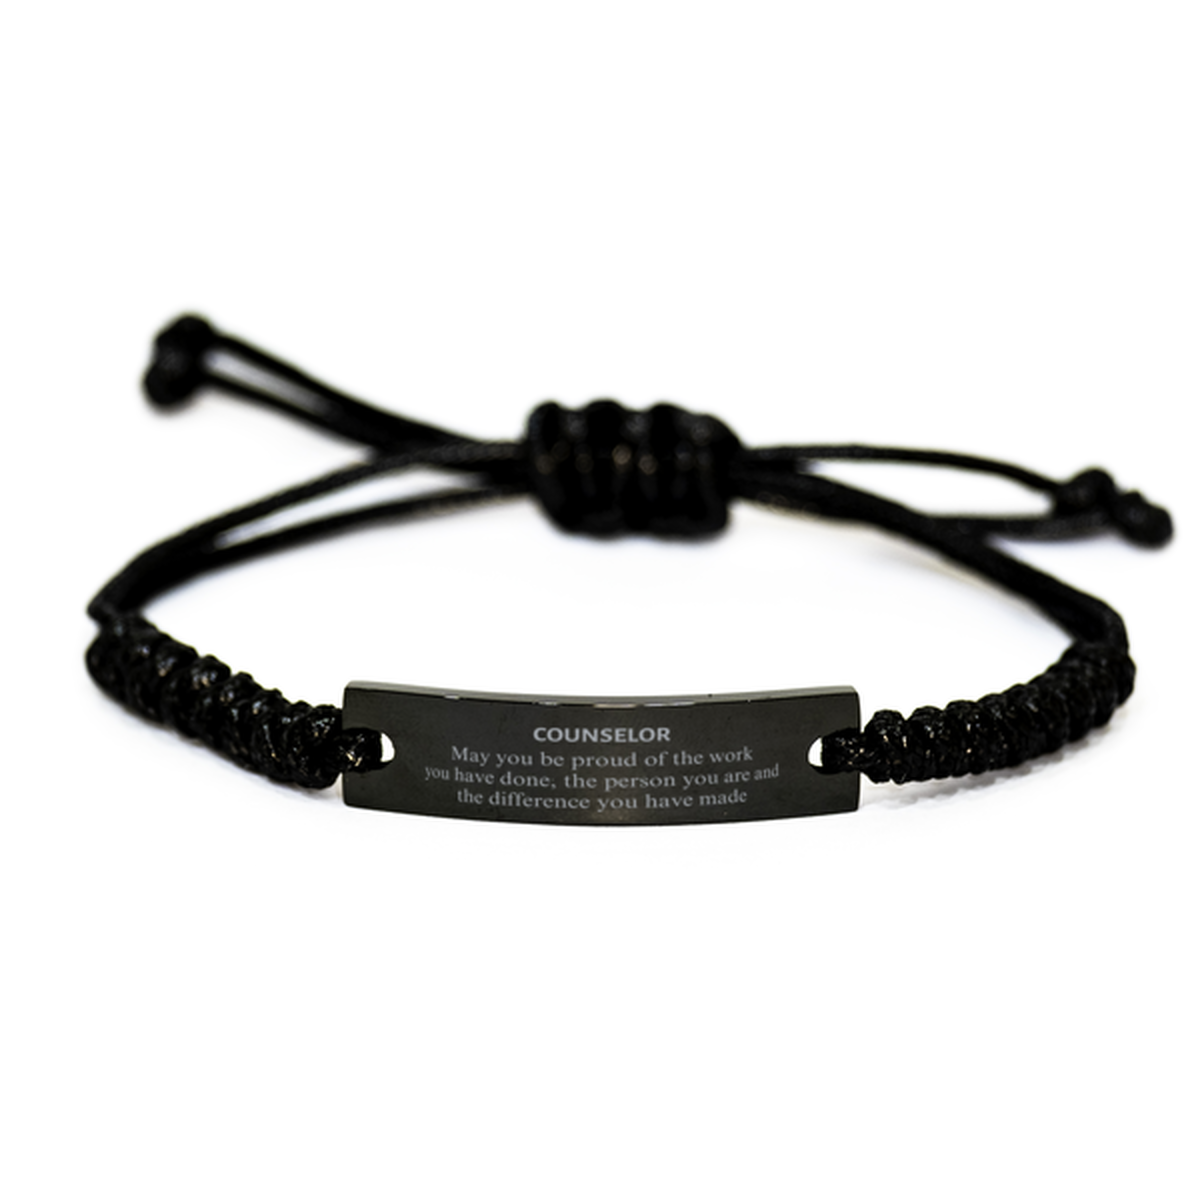 Counselor May you be proud of the work you have done, Retirement Counselor Black Rope Bracelet for Colleague Appreciation Gifts Amazing for Counselor